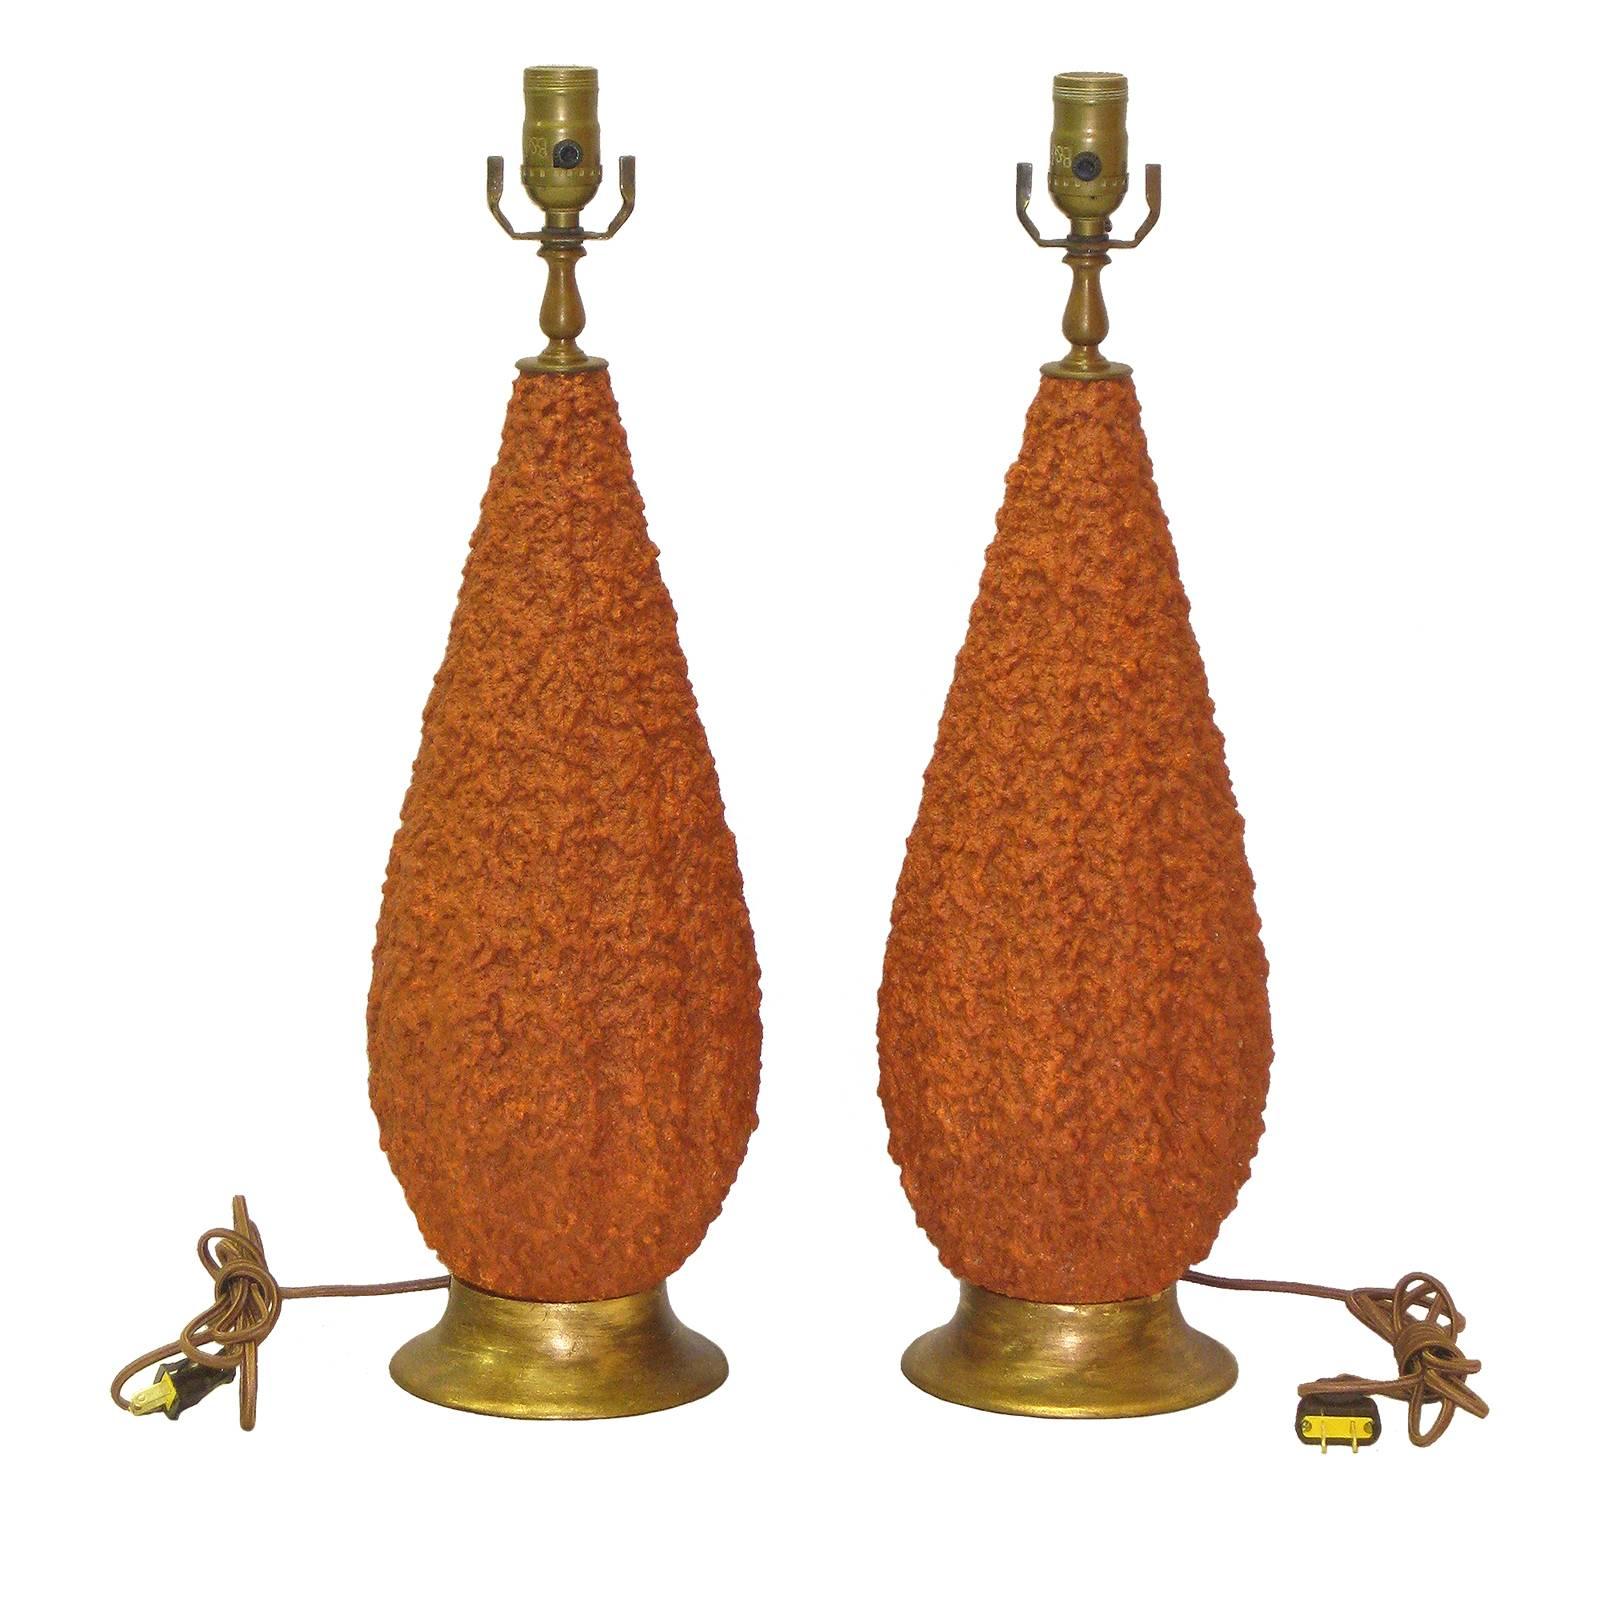 A pair of Mid-Century Modern teardrop-shaped coral ceramic lamps with stippled surface. This pair of American ceramic table lamps is raised on a dirty gold wooden base. The lamps are wired for the US market. The height provided below is to the top